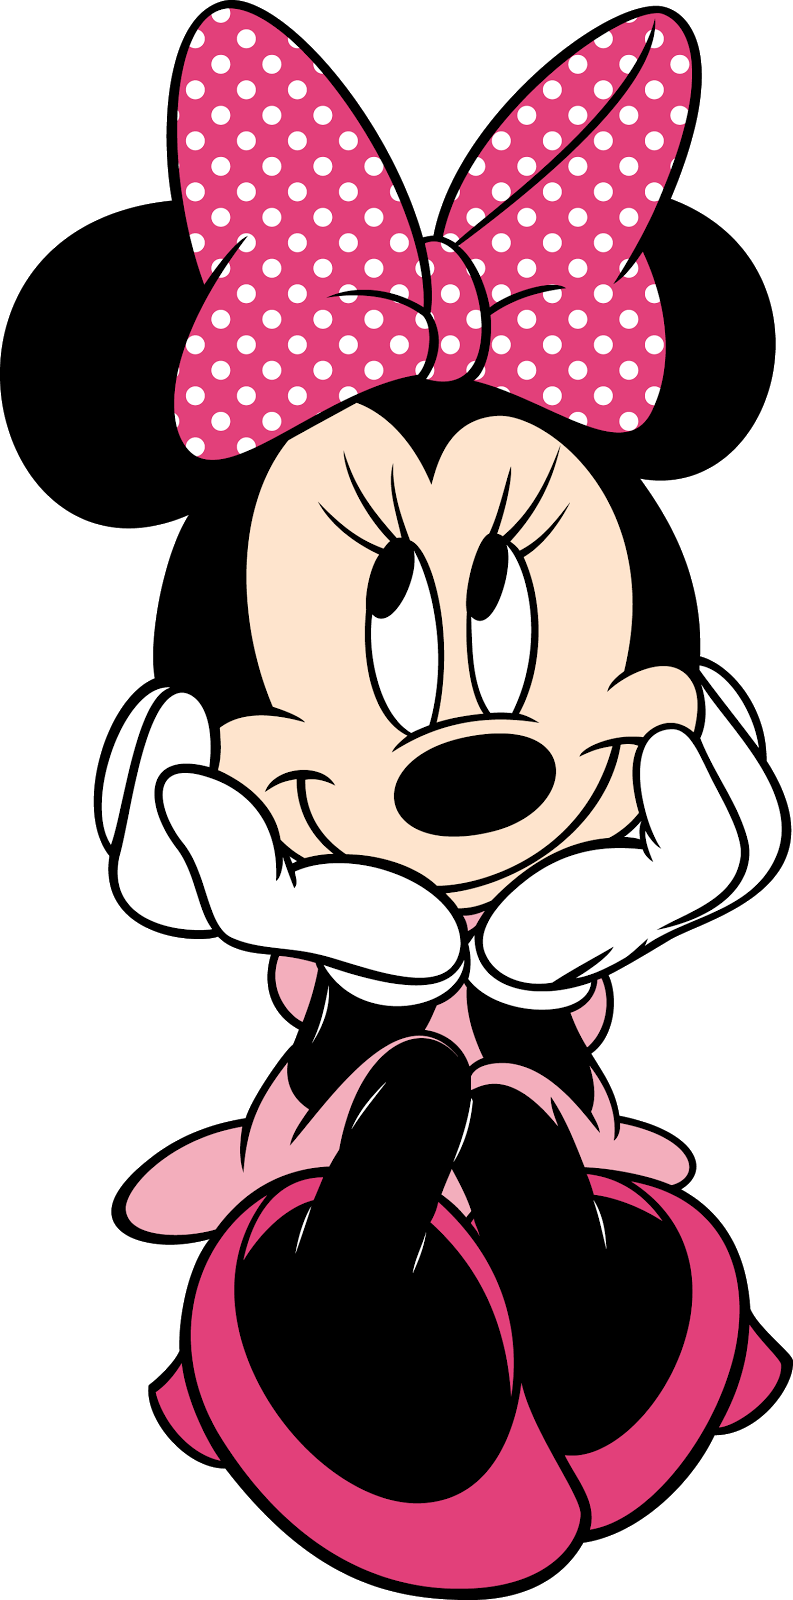 2 clipart minnie mouse. Panda free images baby